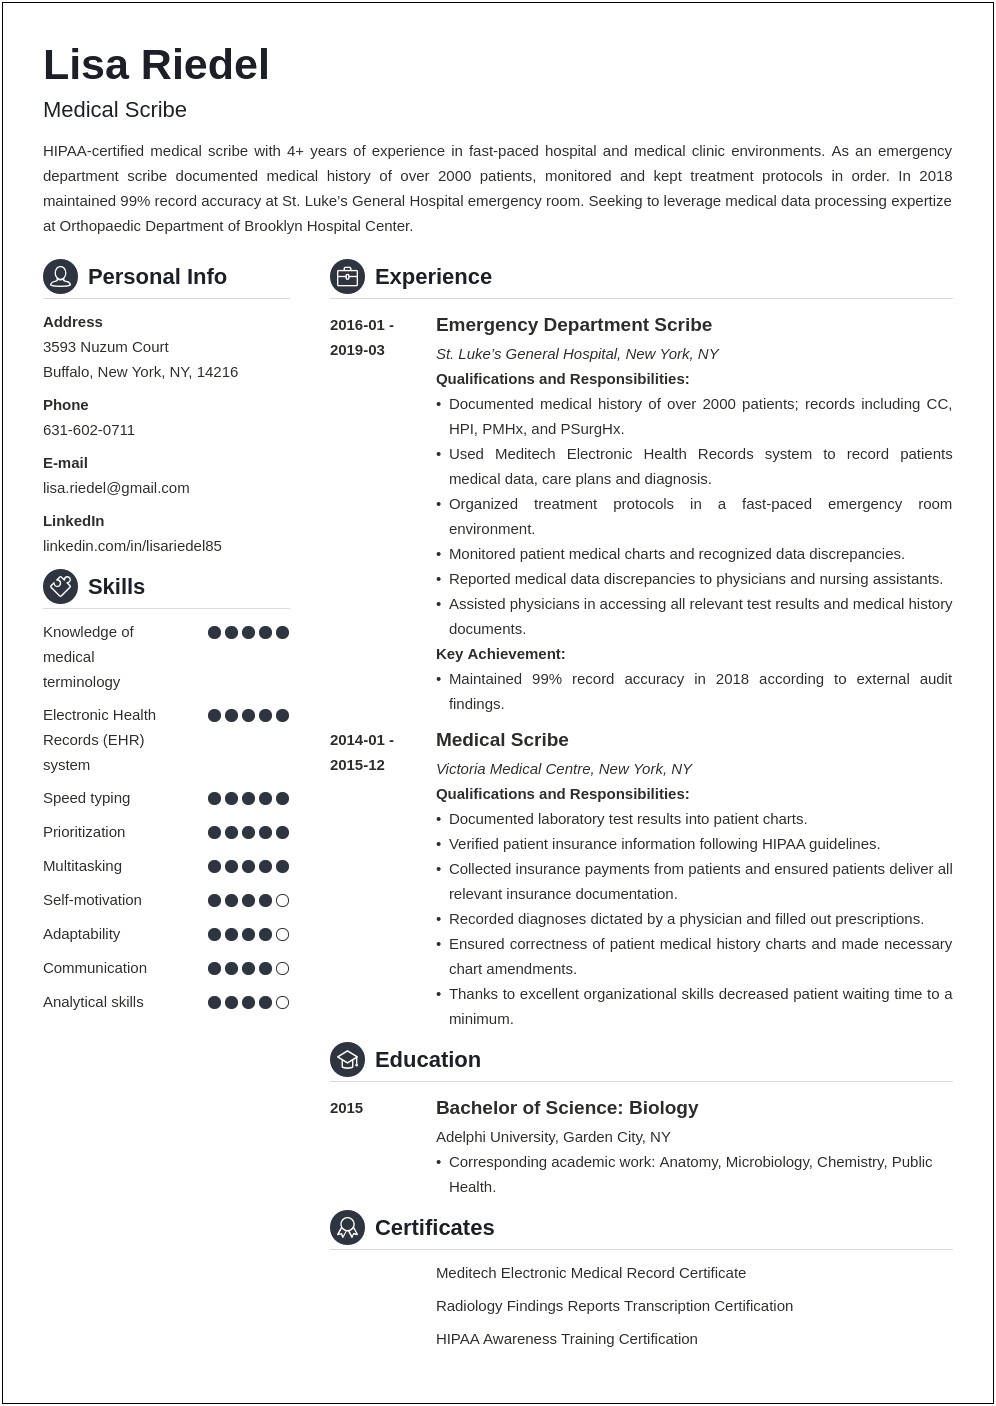 Example Resume Applying For Medical Scribe